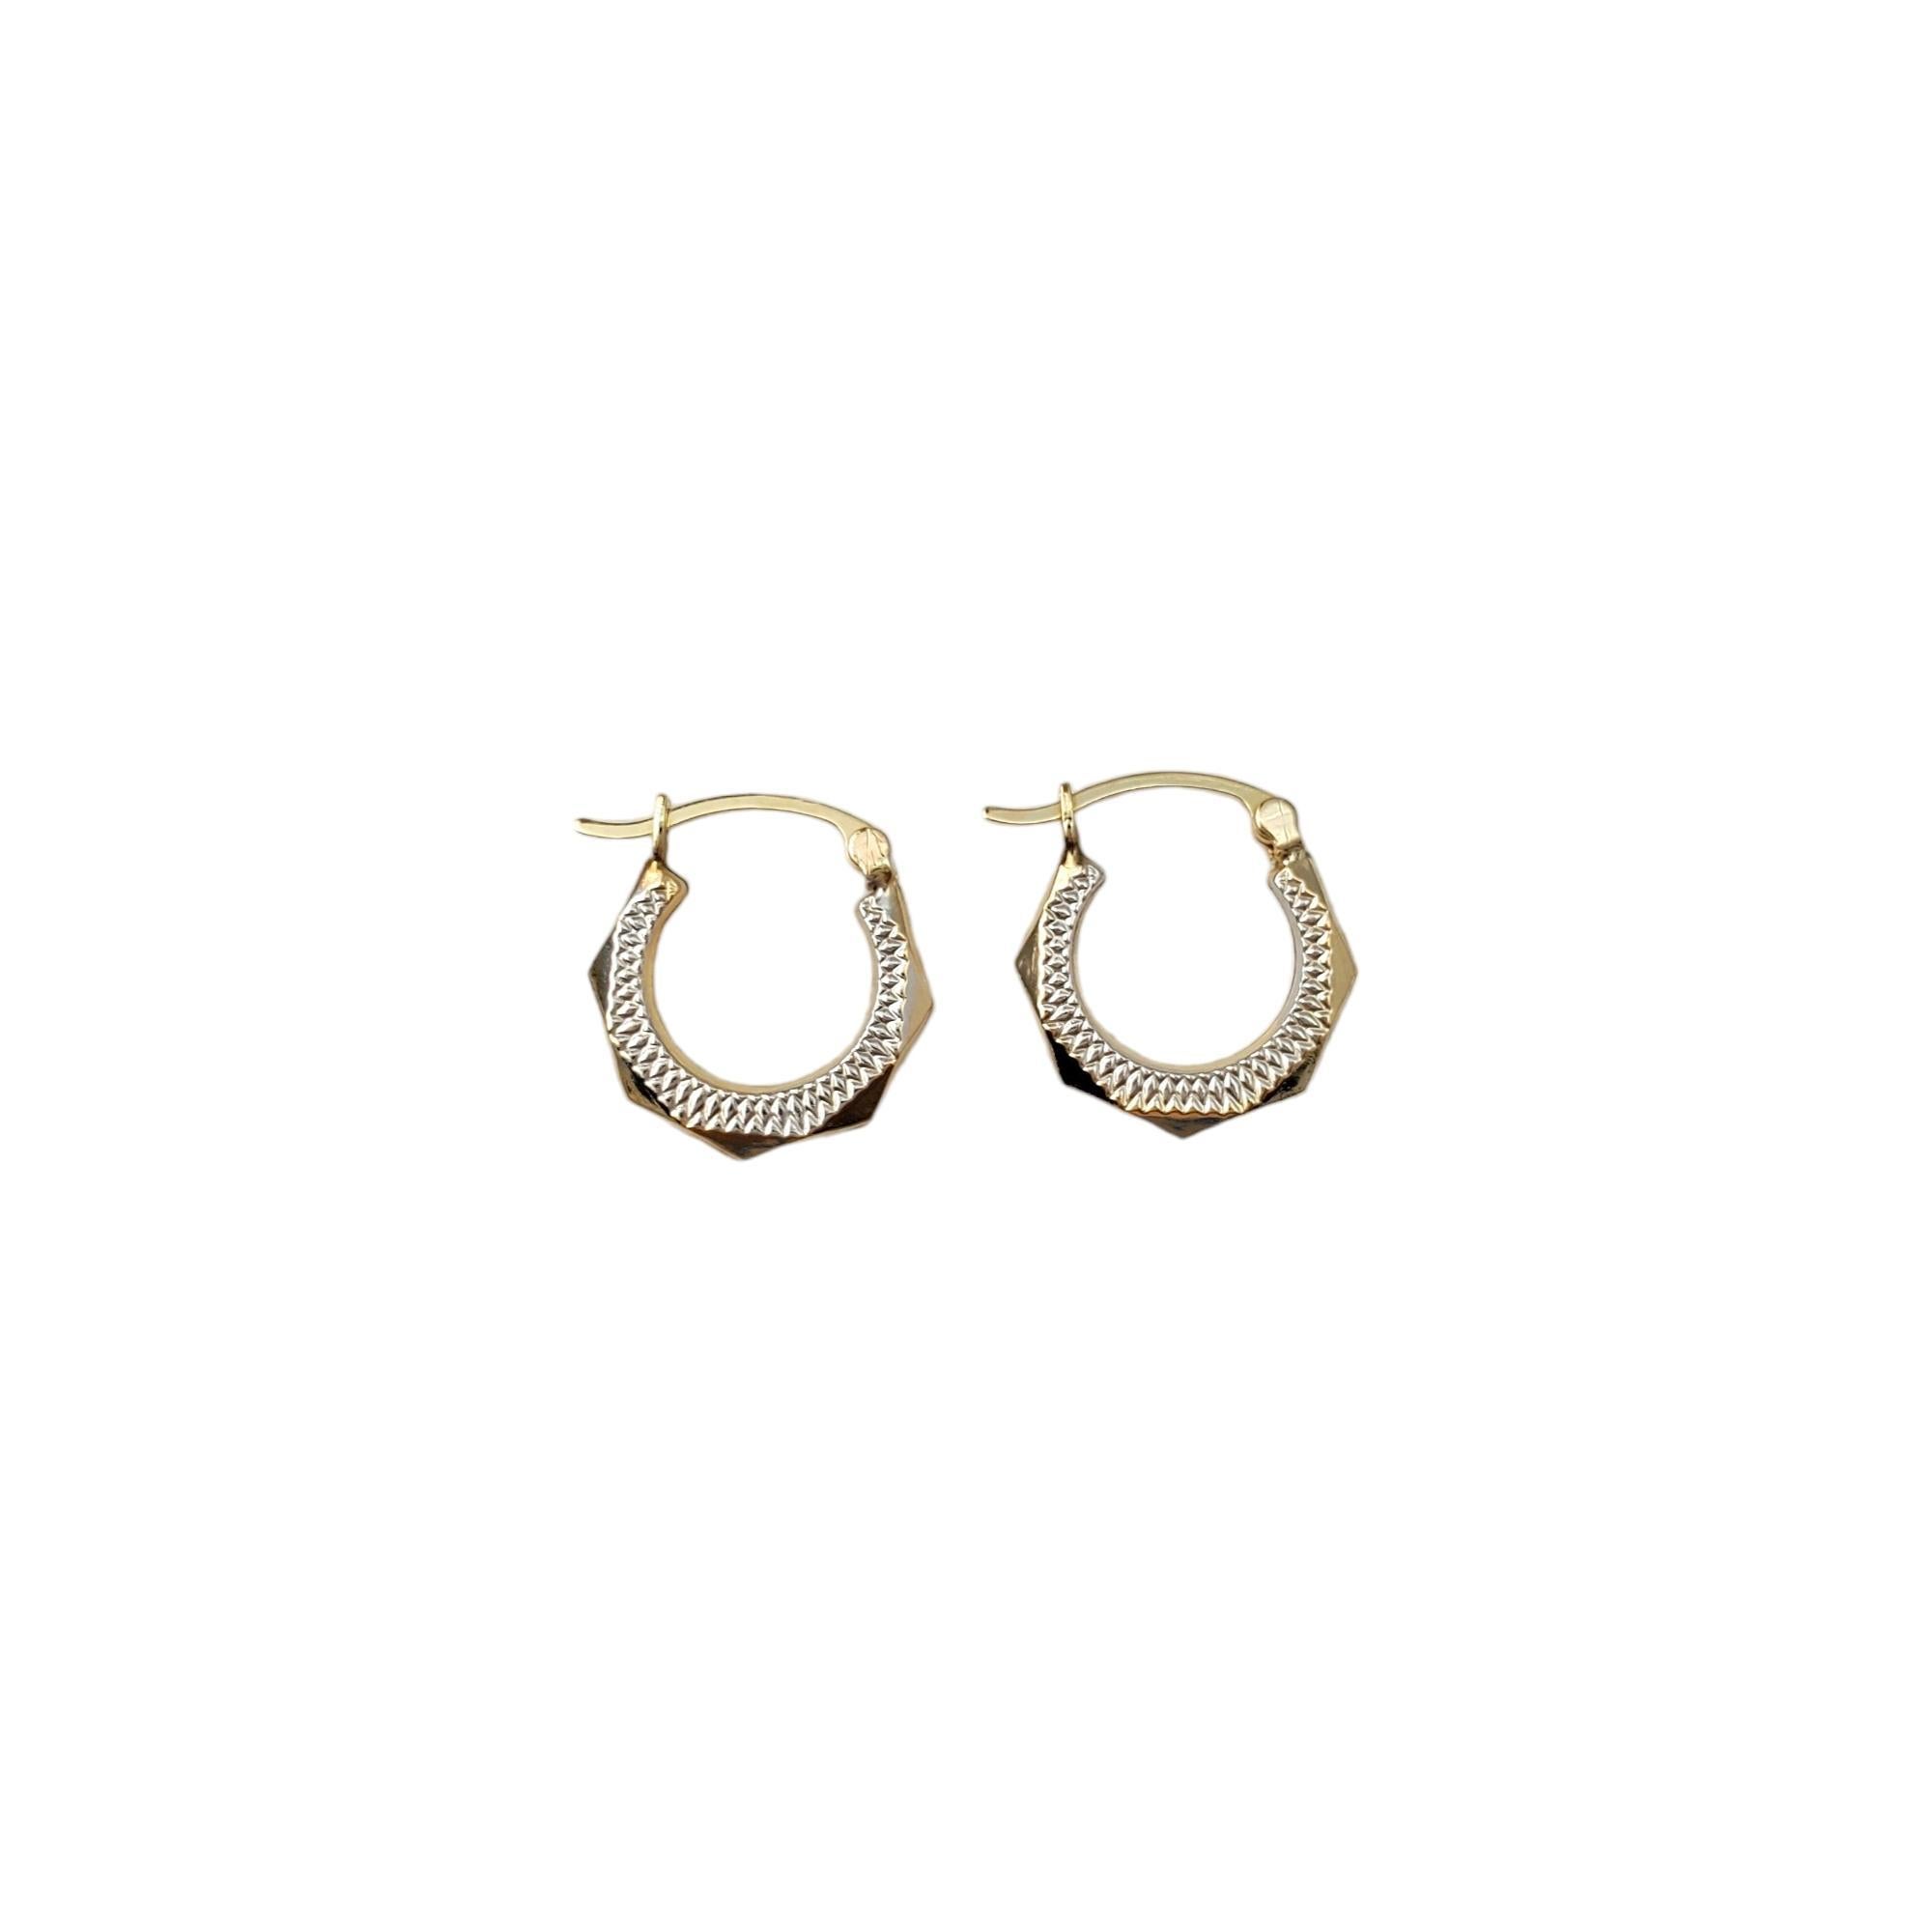 14K Yellow and White Gold Two Tone Hoop Earrings -

These stunning earrings are a classy accessory.

Size:  16.8 mm X 2.3 mm X 3.4 mm

Weight:  0.7 dwt. /  1.1 gr.

Marked: SLC 14K 

Very good condition, professionally polished.

Will come packaged